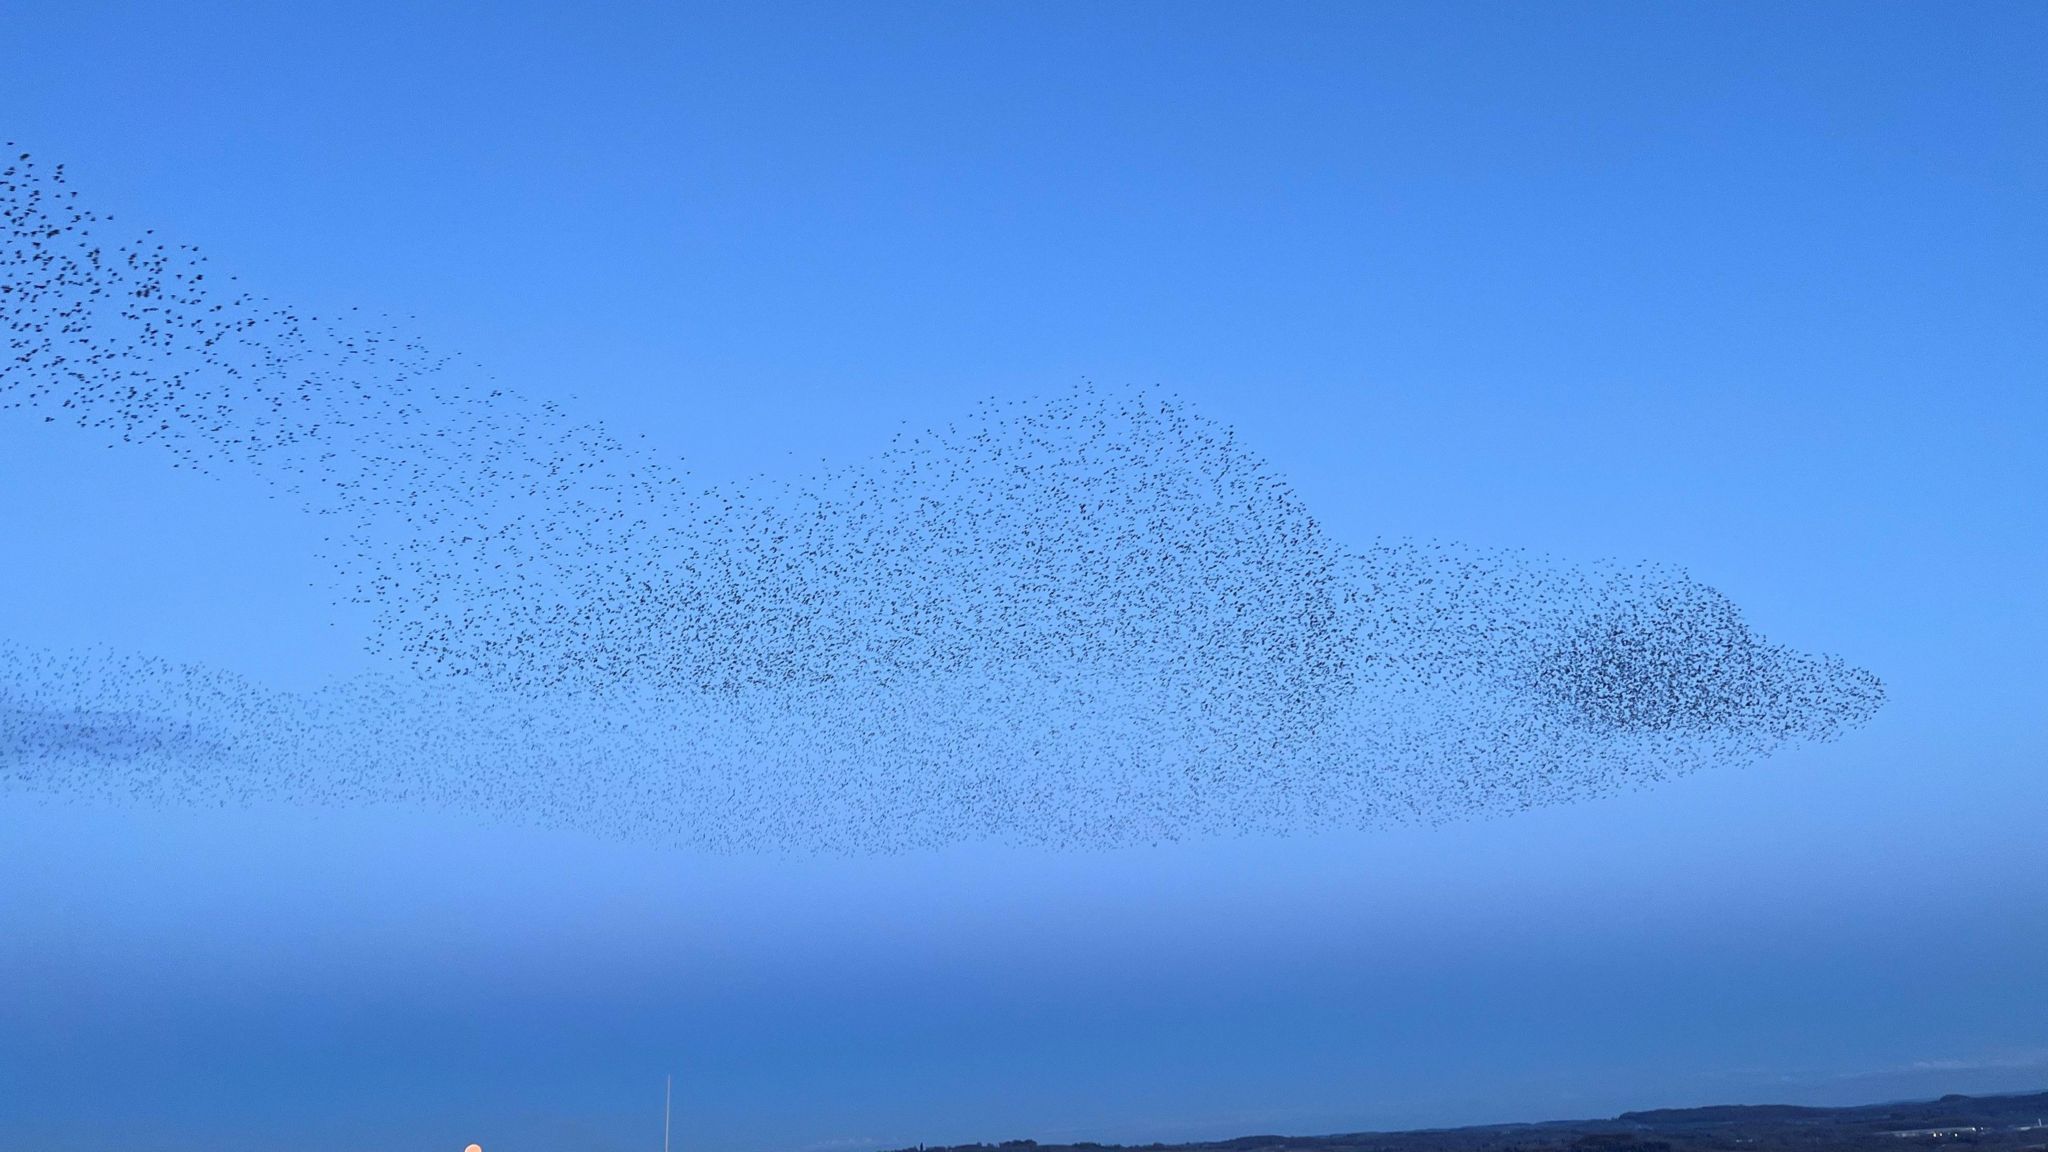 The murmuration in the shape of a bird